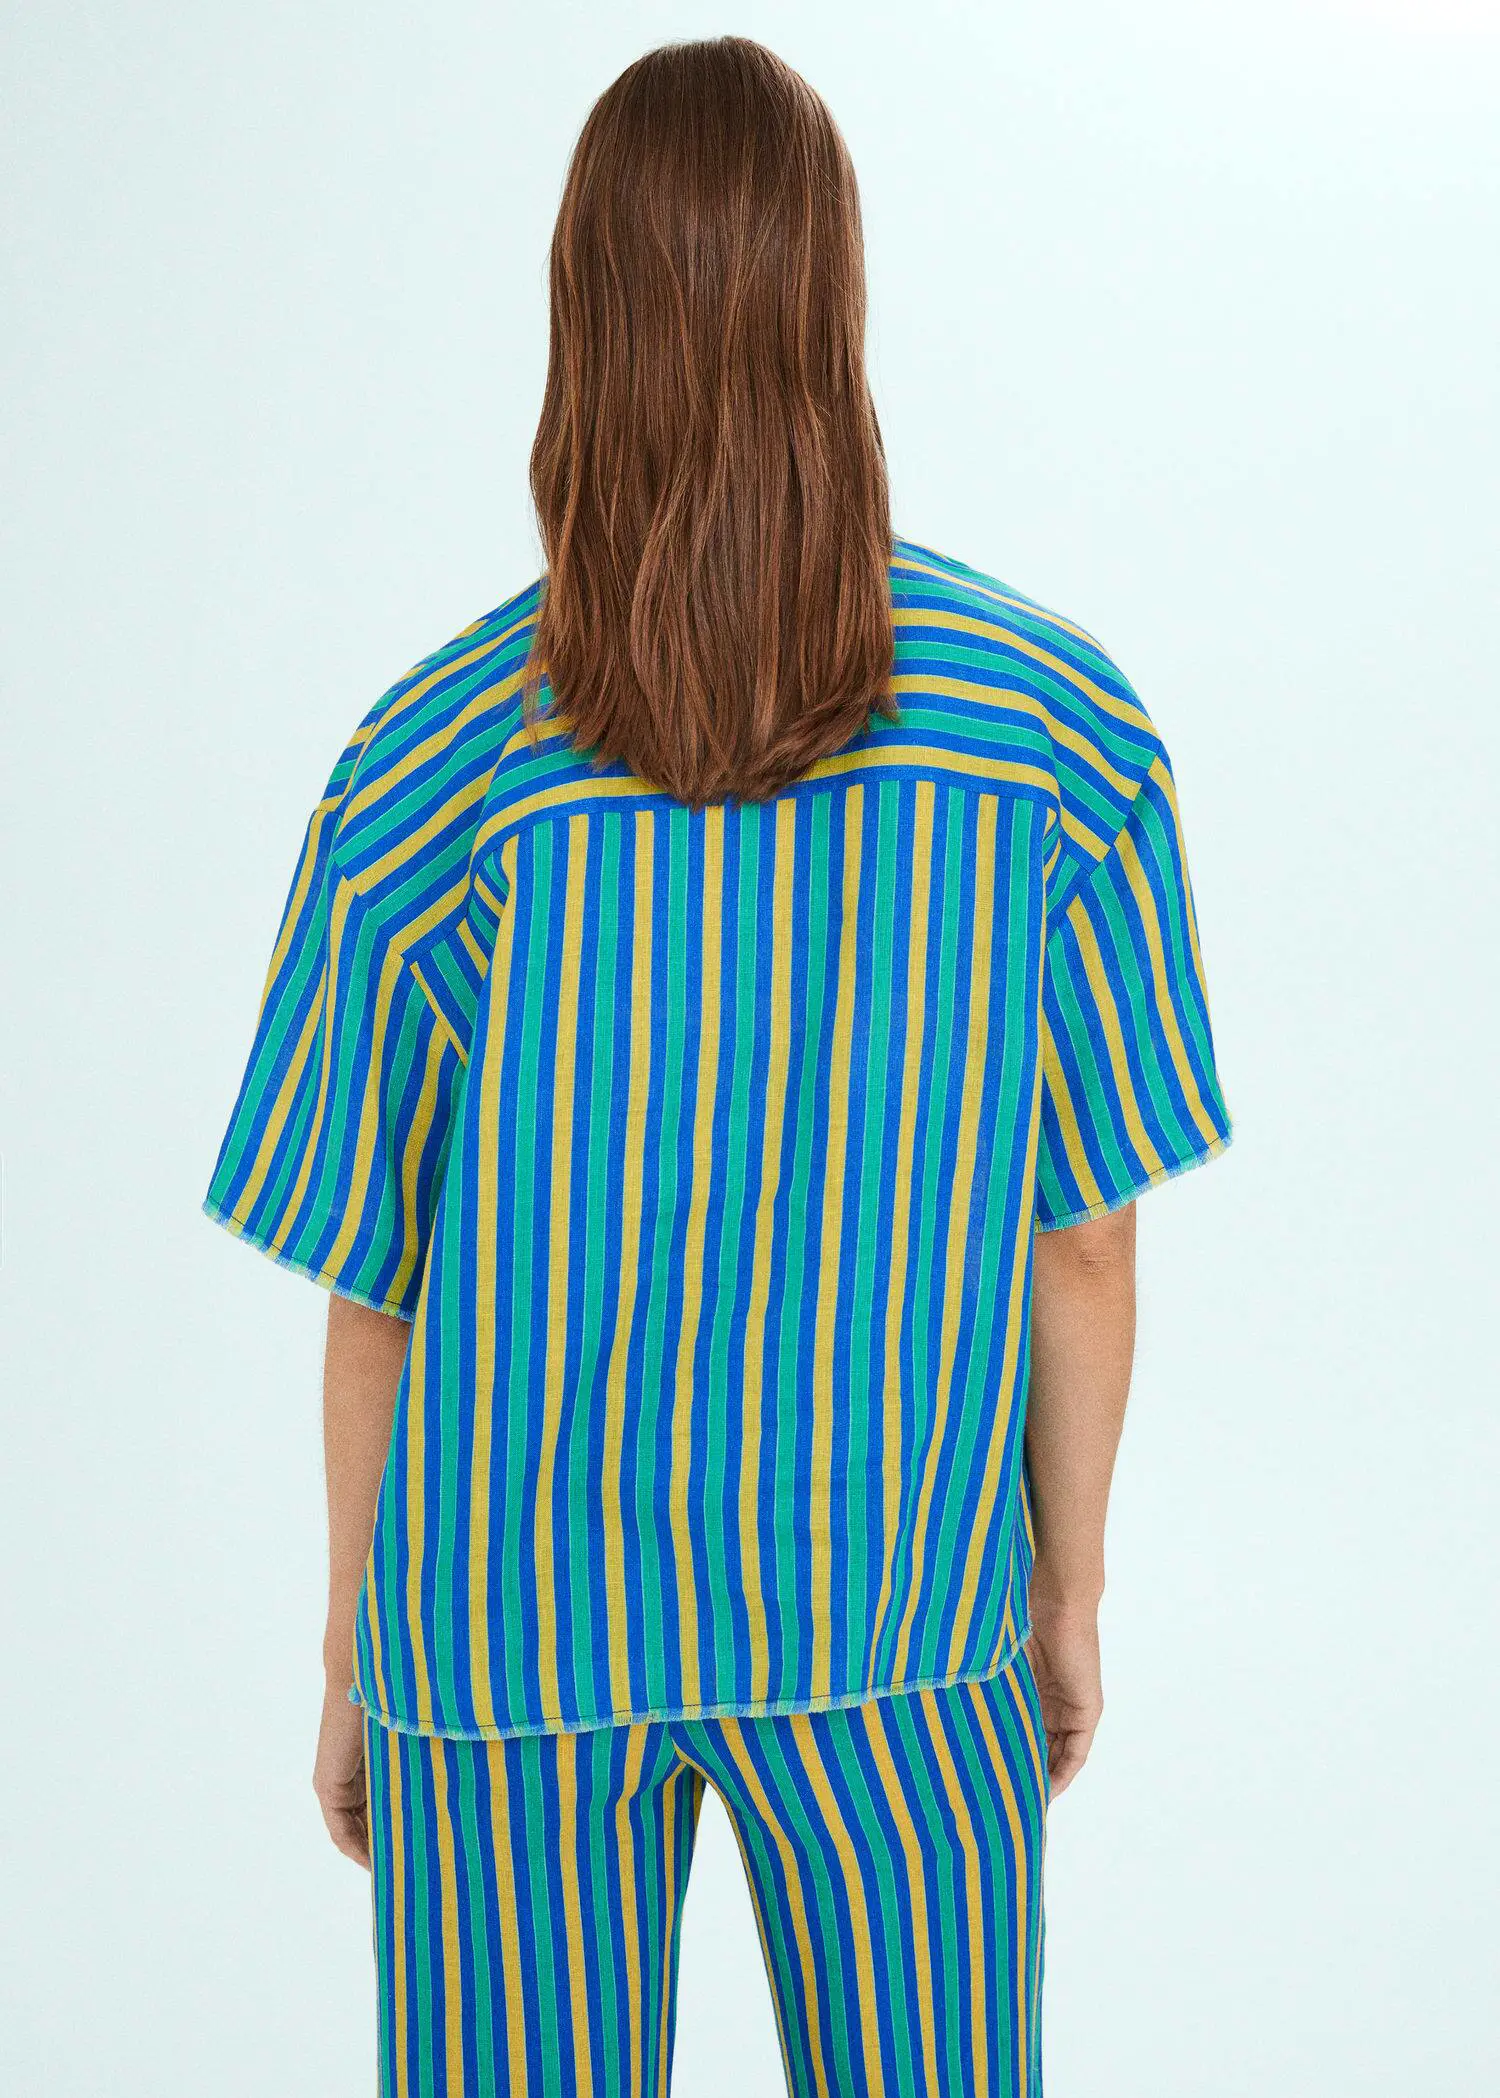 Mango Multi-colored striped linen shirt. a person with long brown hair wearing a blue and yellow shirt. 